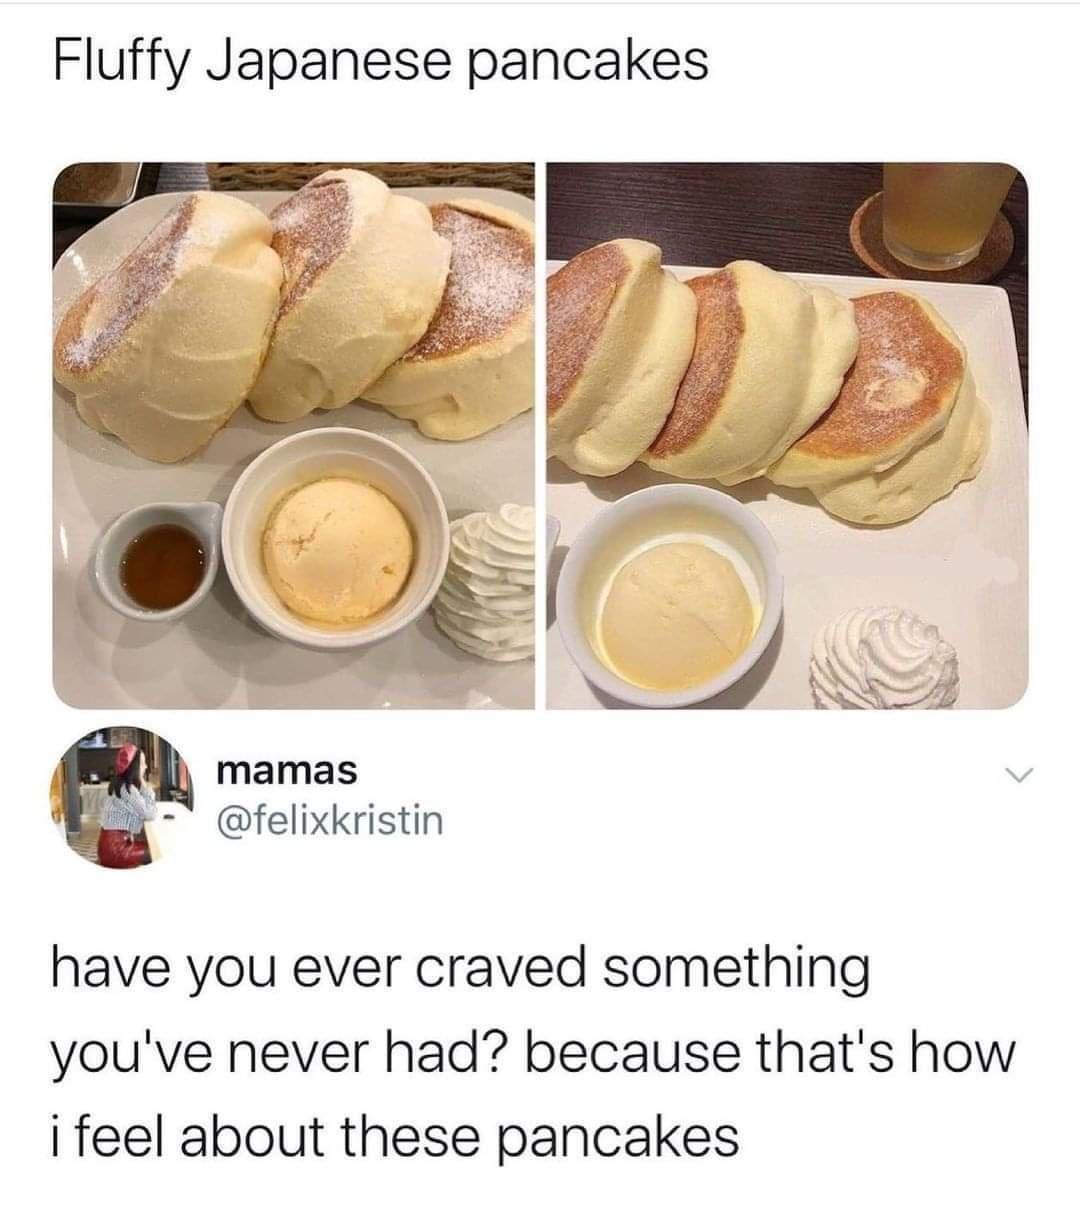 japanese pancake meme - Fluffy Japanese pancakes mamas have you ever craved something you've never had? because that's how i feel about these pancakes